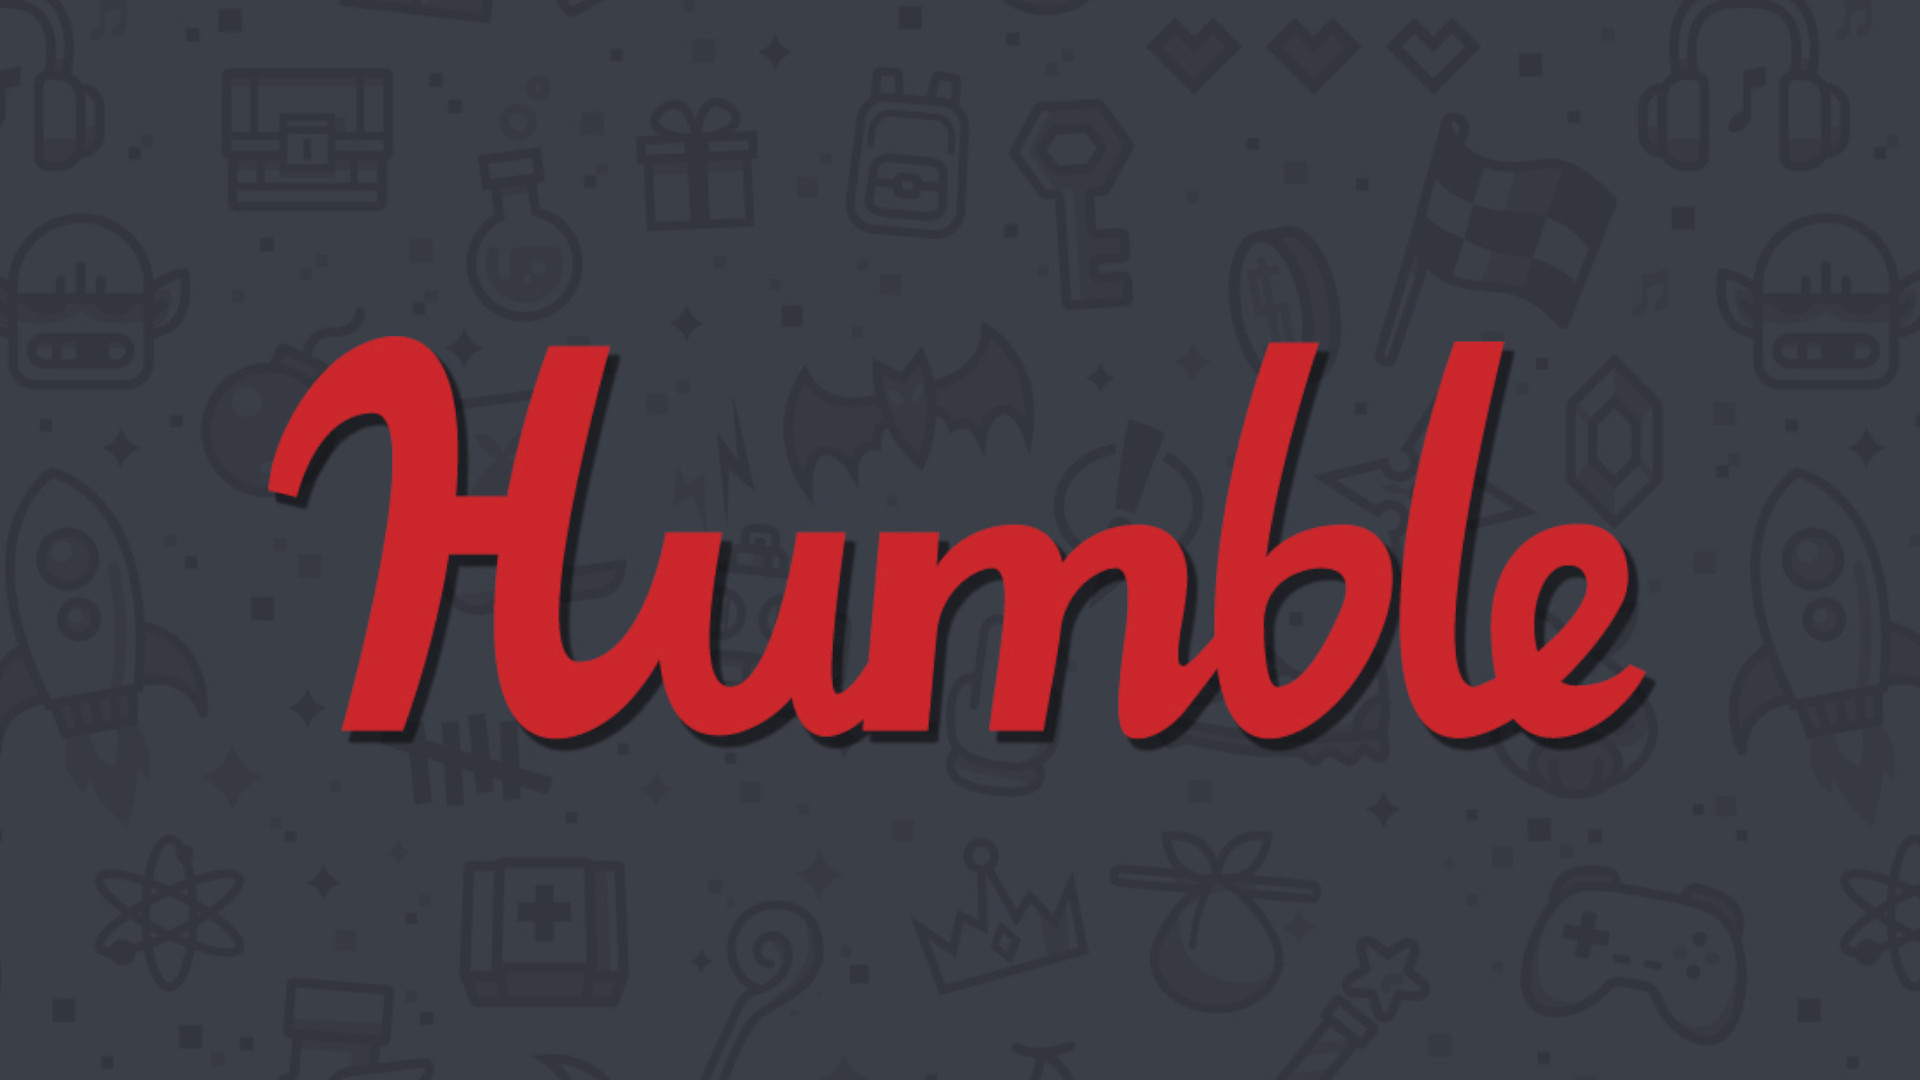 Humble’s End of Summer sale features deals on Red Dead Redemption 2, Borderlands 3, and more